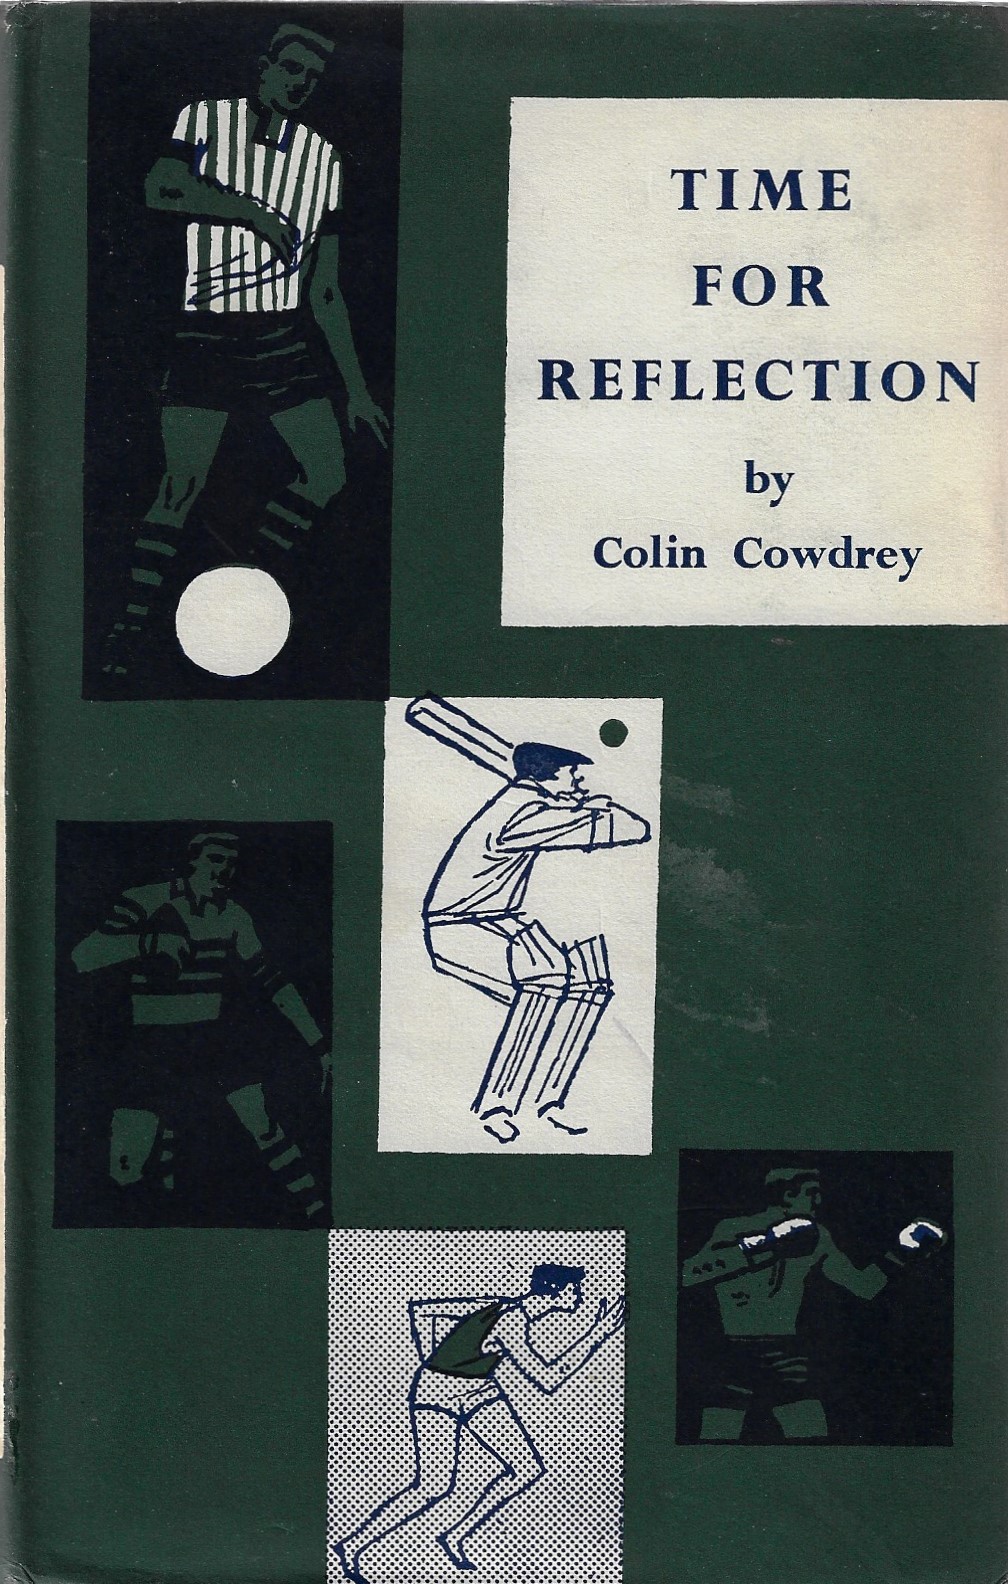 Cowdrey, Colin - Time for reflection